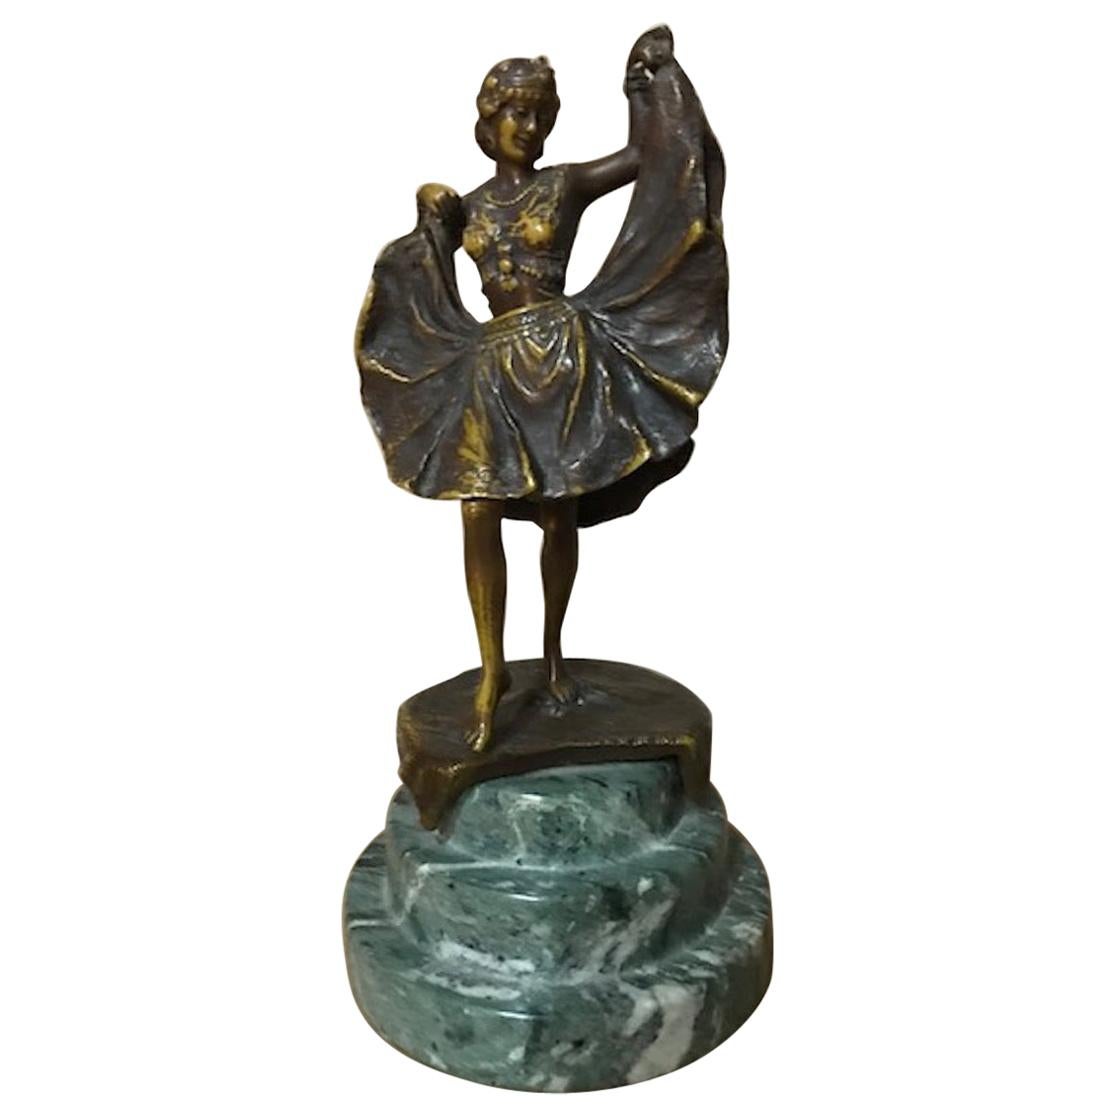 Very nice Art nouveau Franz Xavier Bergman oriental dancer Vienna bronze from the 1900s on a marble base.
Bergman was signing his creations with either a 